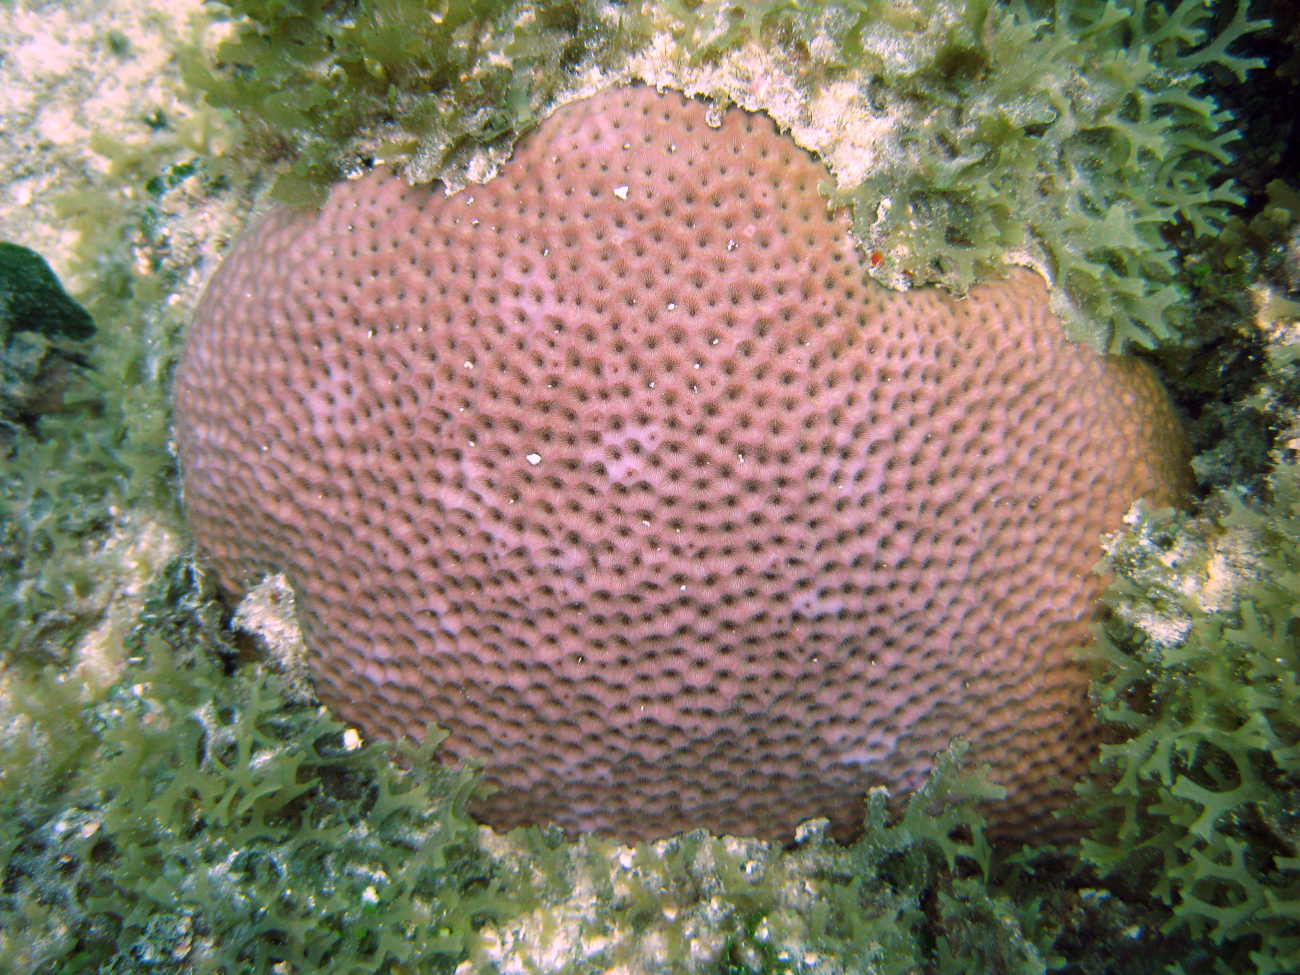 A massive starlet coral (Siderastrea siderea) surrounded by Y branched algae(Dictyota sp